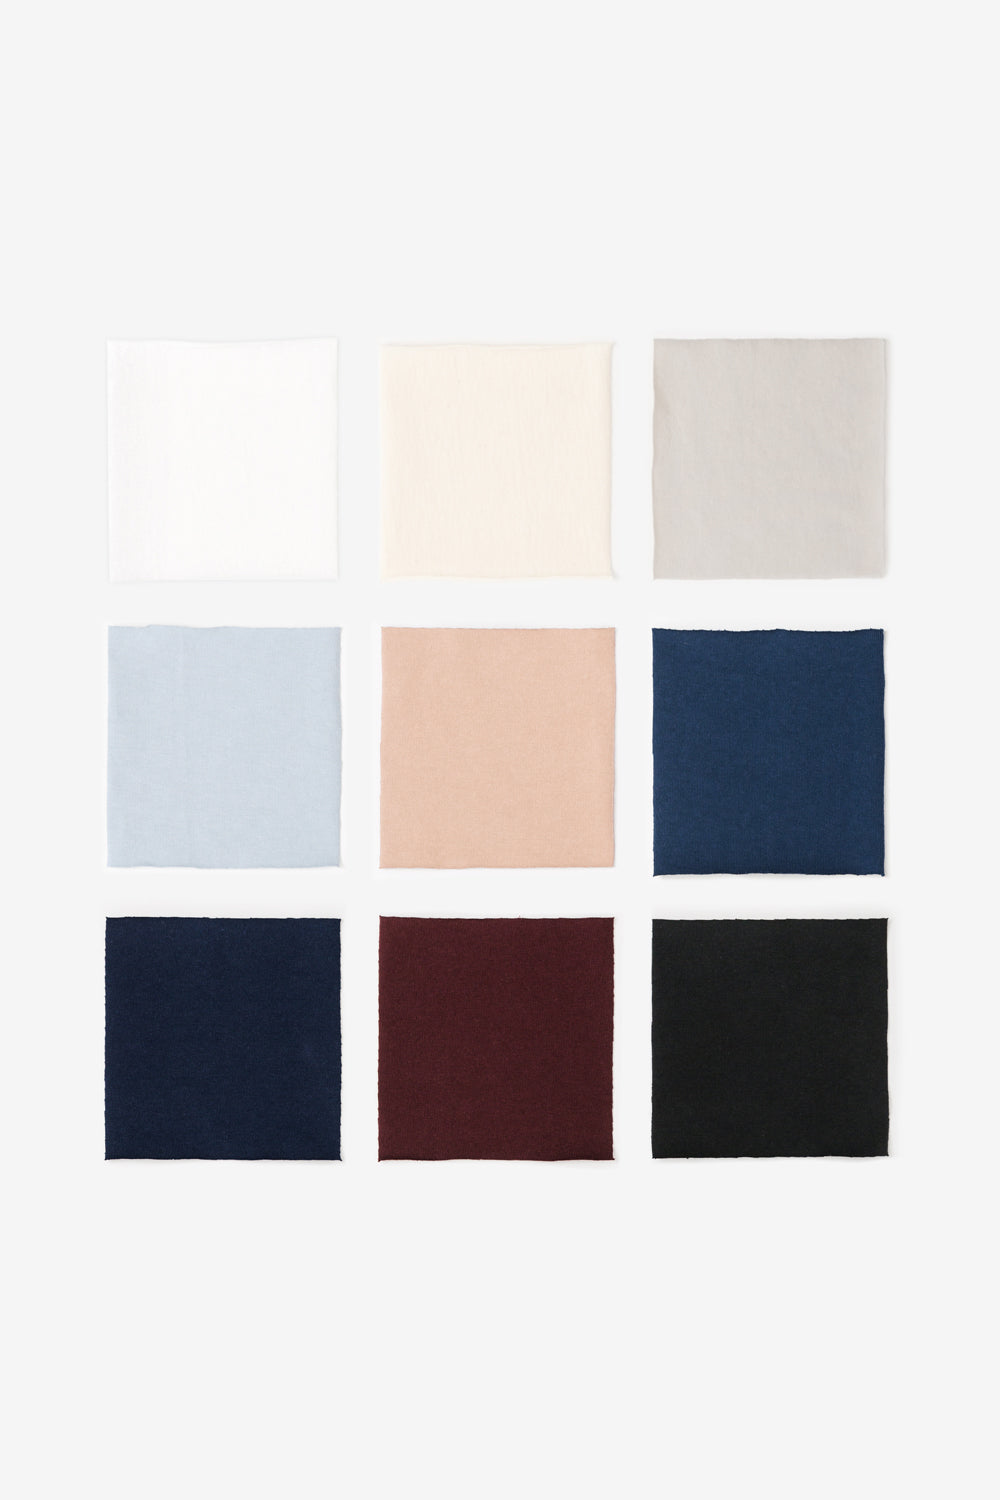 Fabric squares in nine different colors.